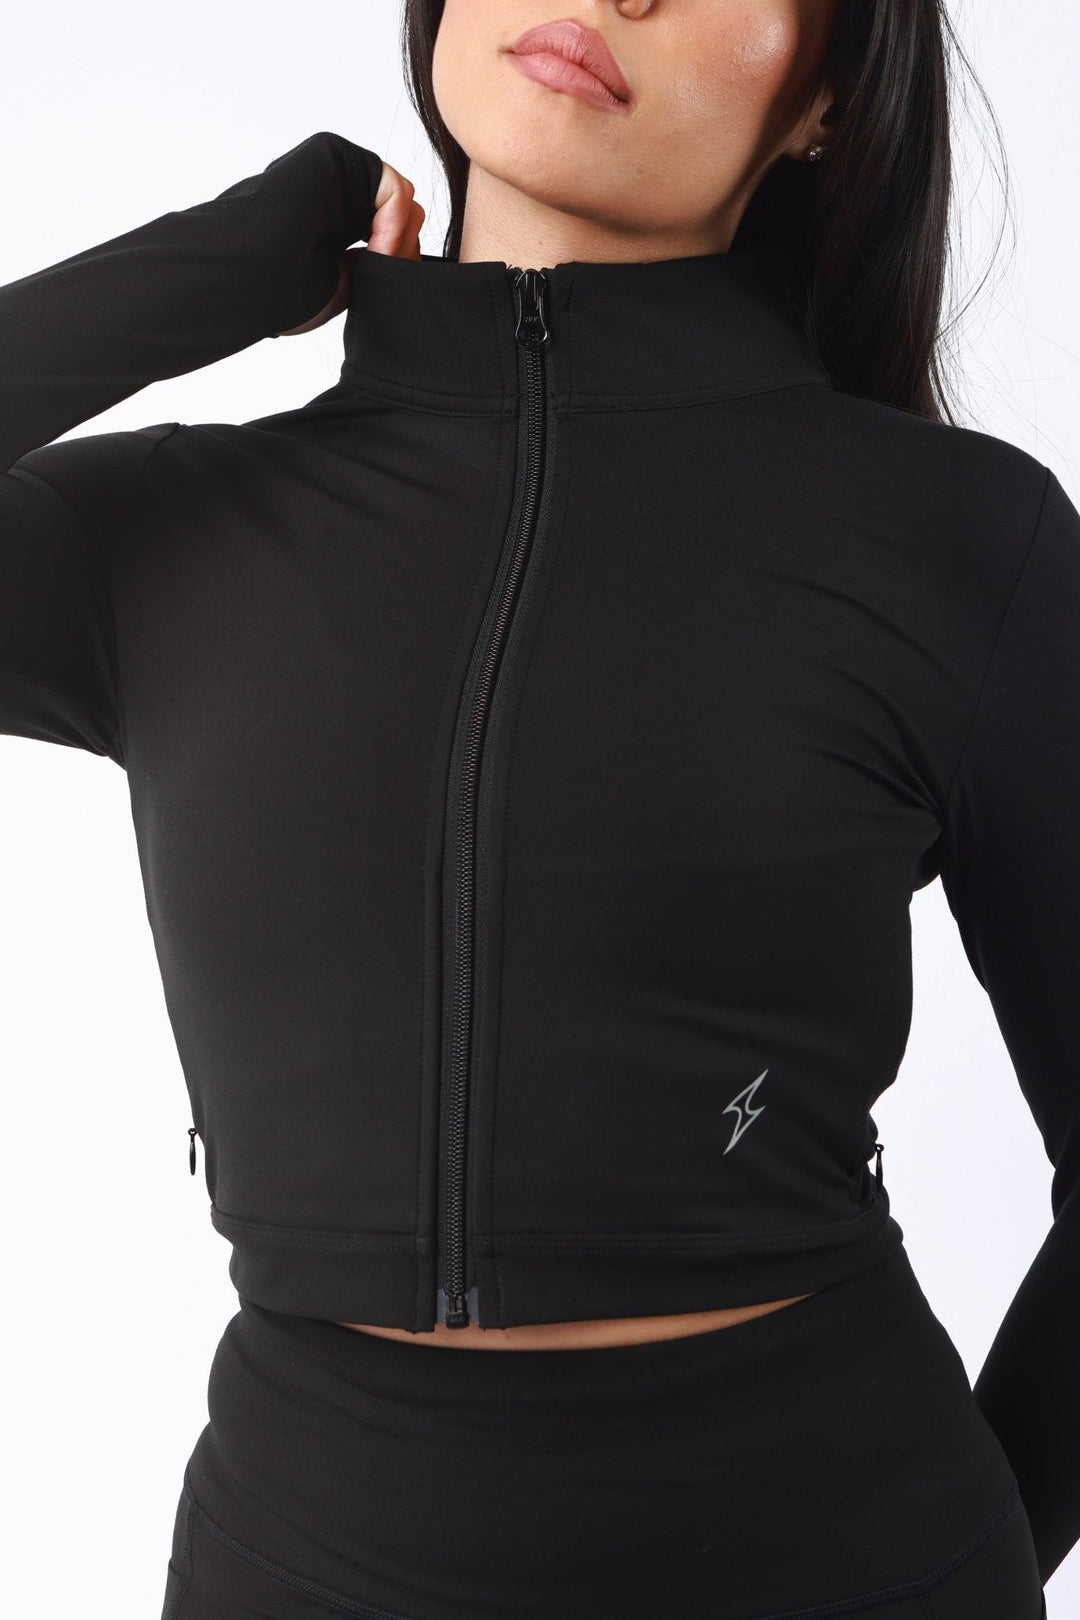 Athletic Women's Jacket With Pockets In Black - attivousa Free Shipping over $75 Womens Activewear Attivo